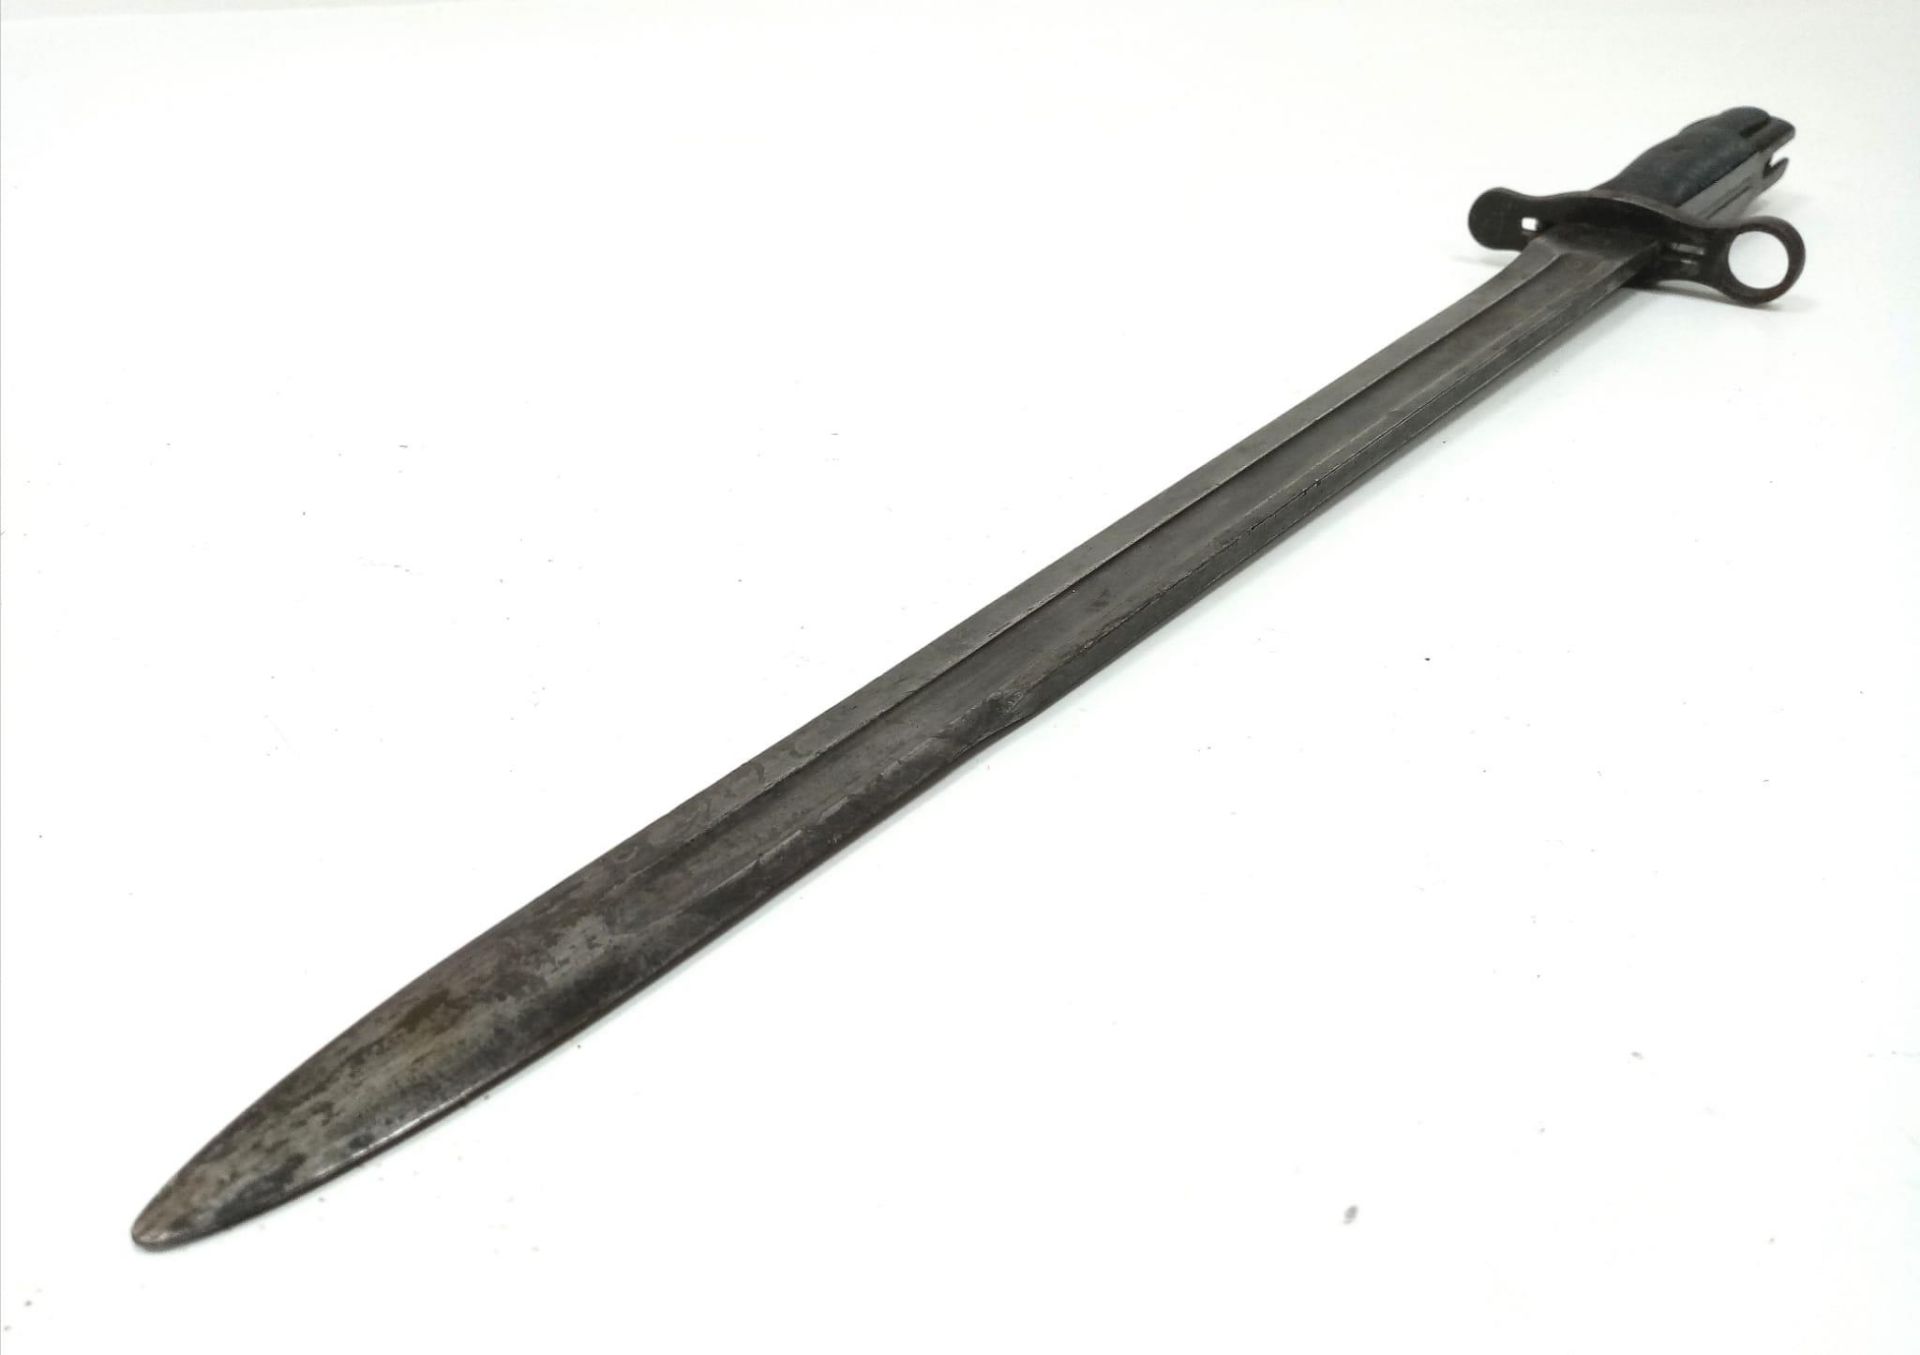 US Springfield Rock Island Arsenal M1905 16” Bayonet Dated 1906 re-issued in 1942 for the Garand - Image 3 of 15